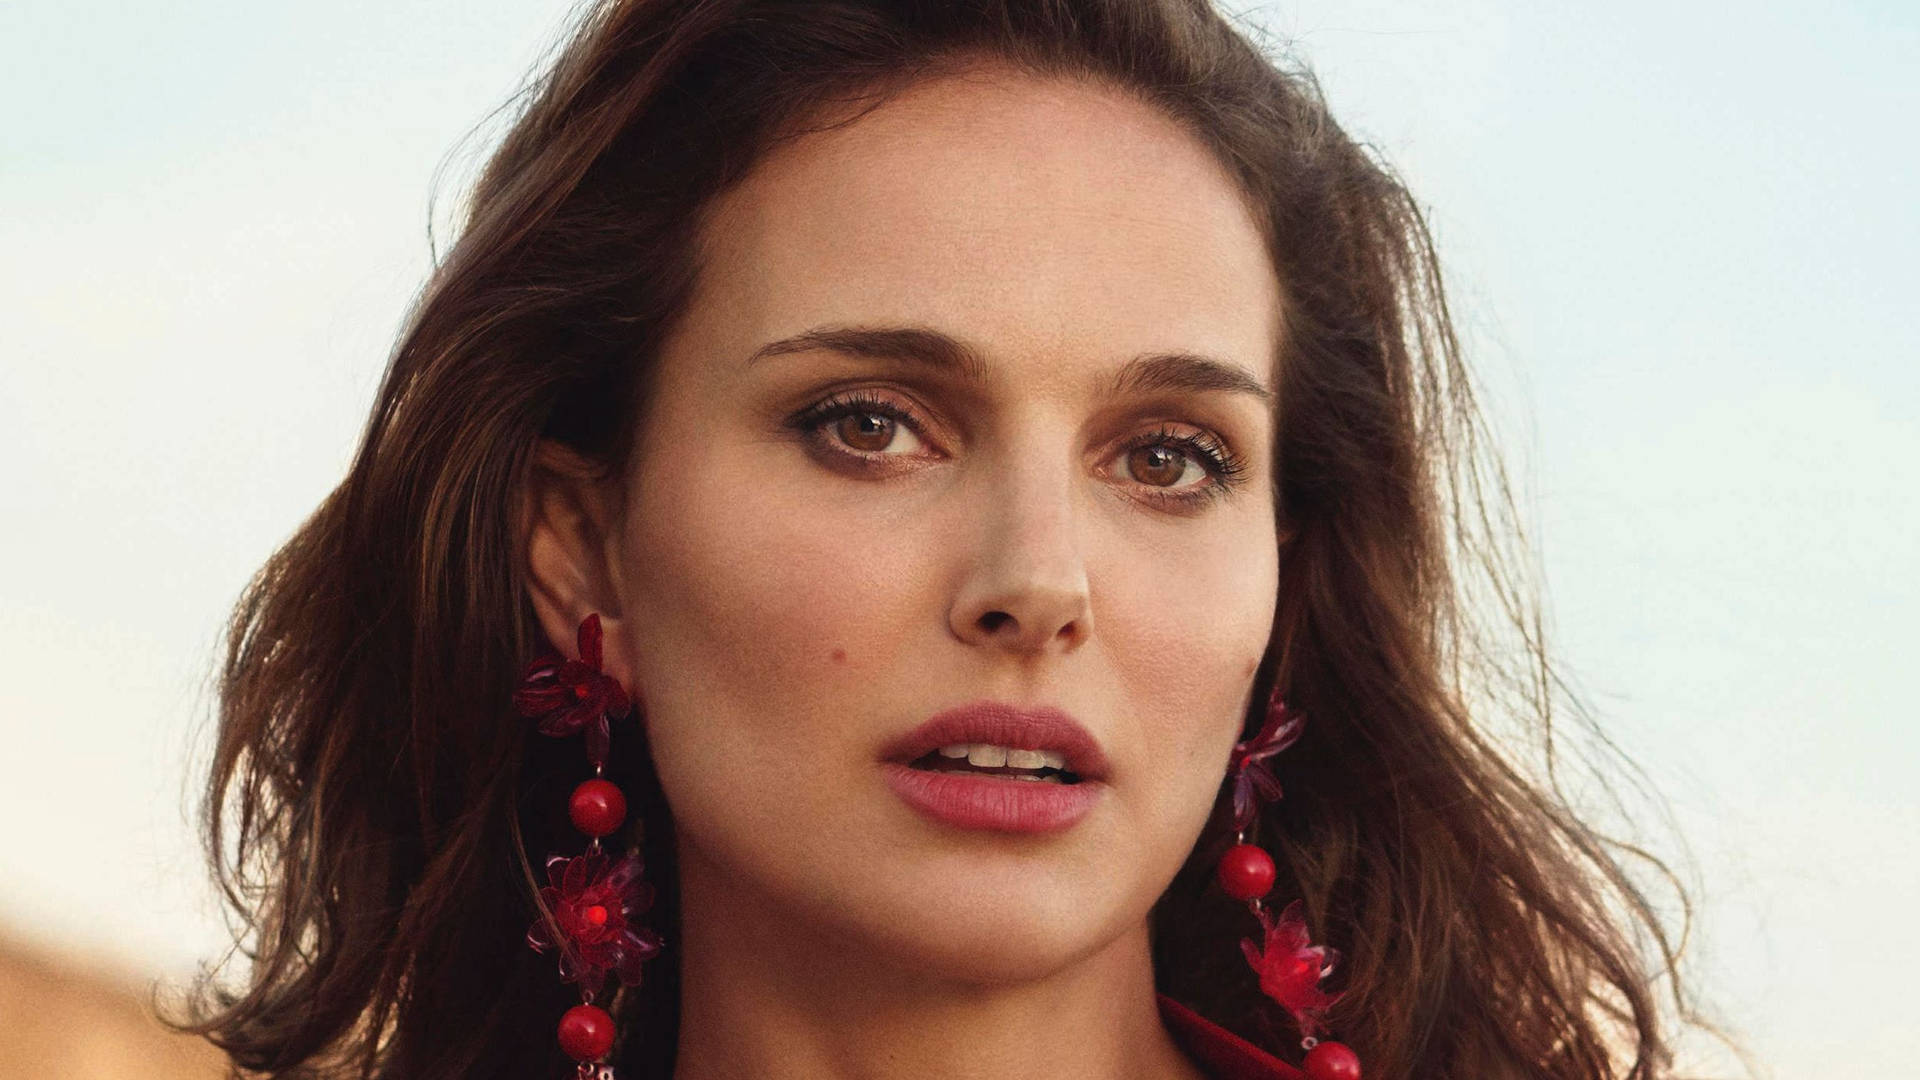 Natalie Portman With Red Earrings Background